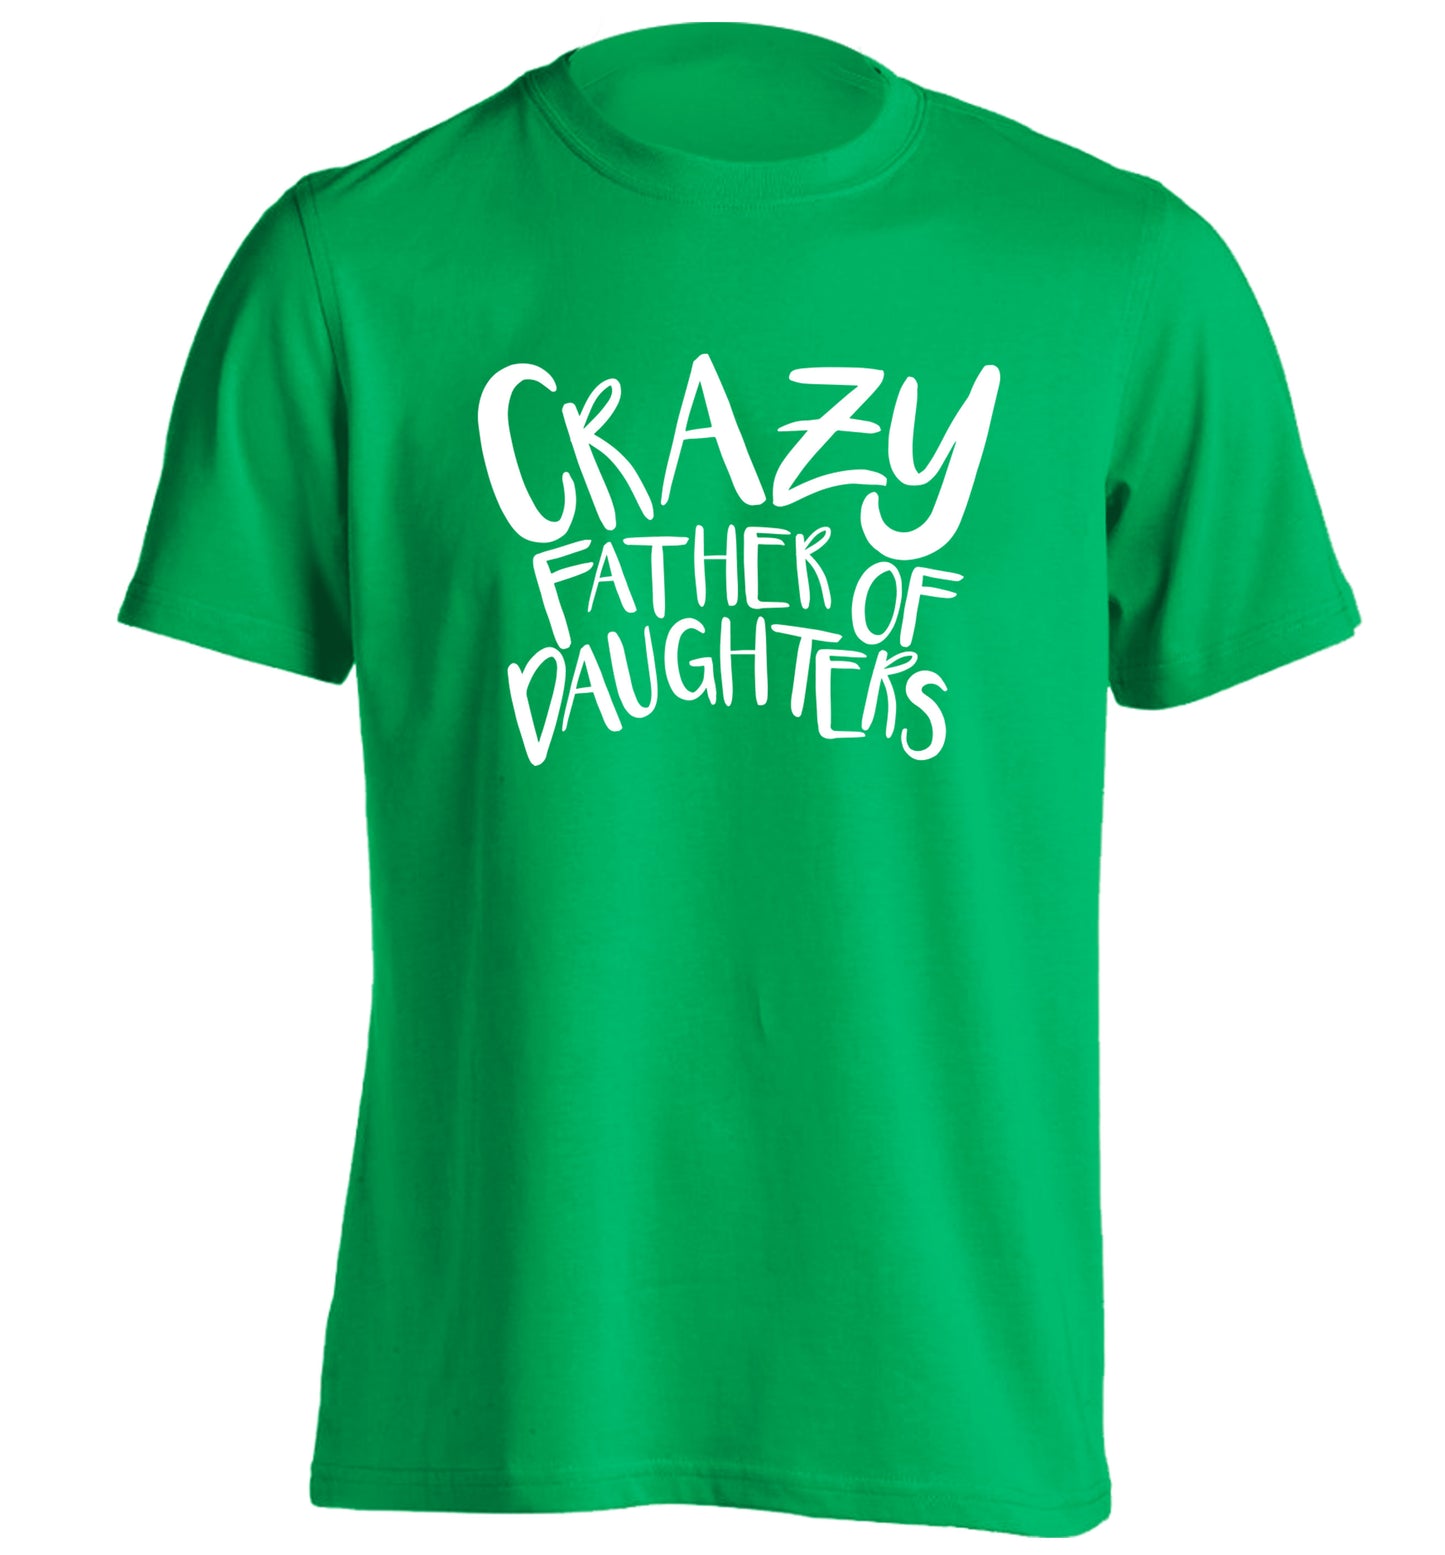 Crazy father of daughters adults unisex green Tshirt 2XL